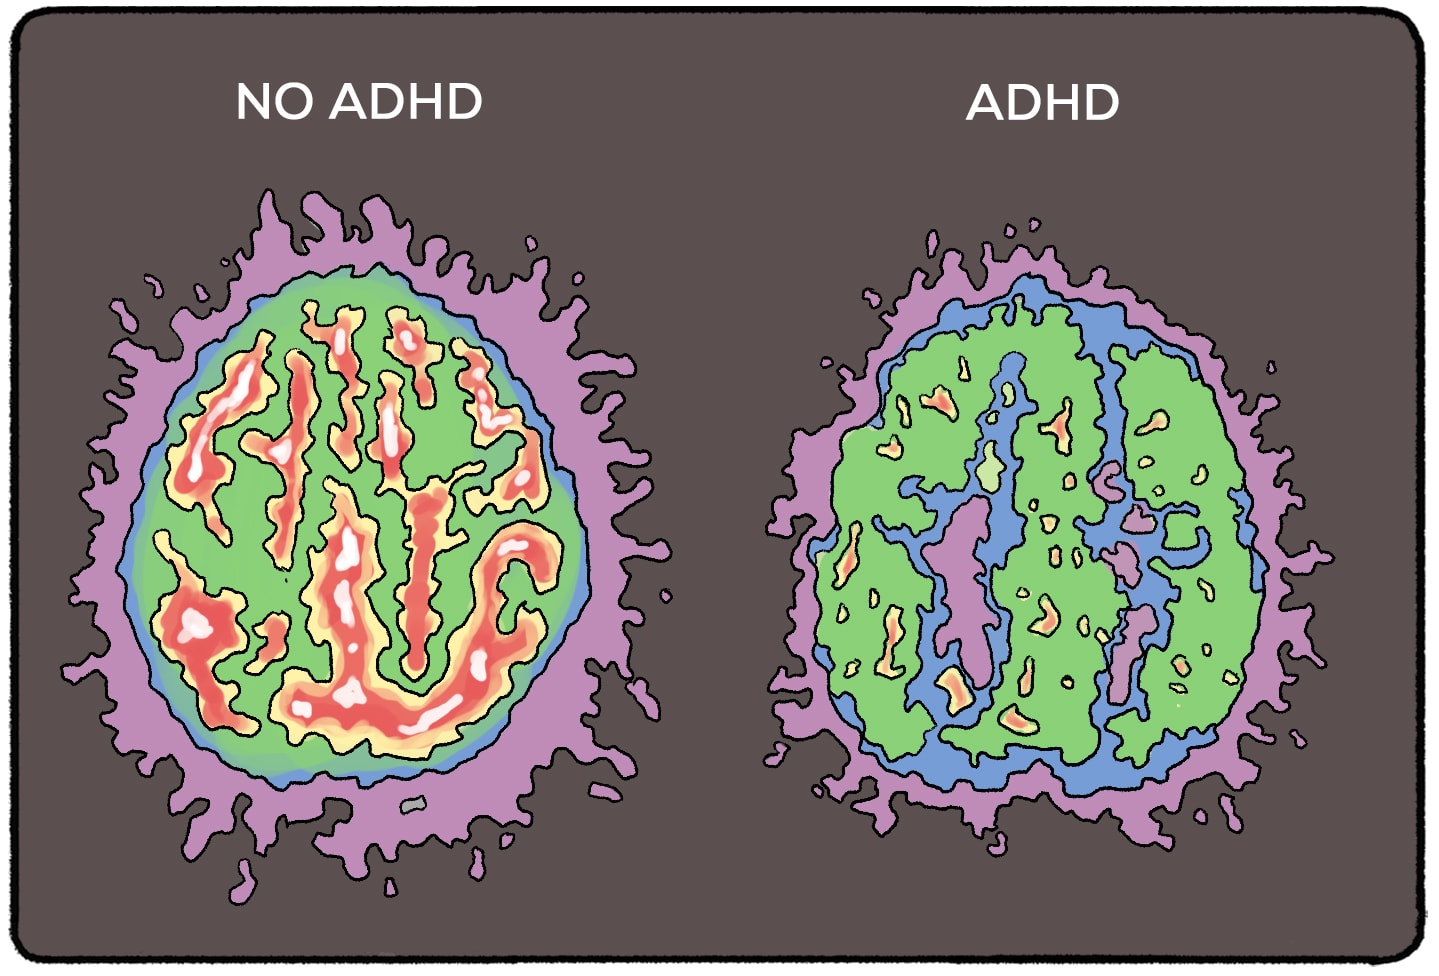 brain with ADHD vs brain without ADHD